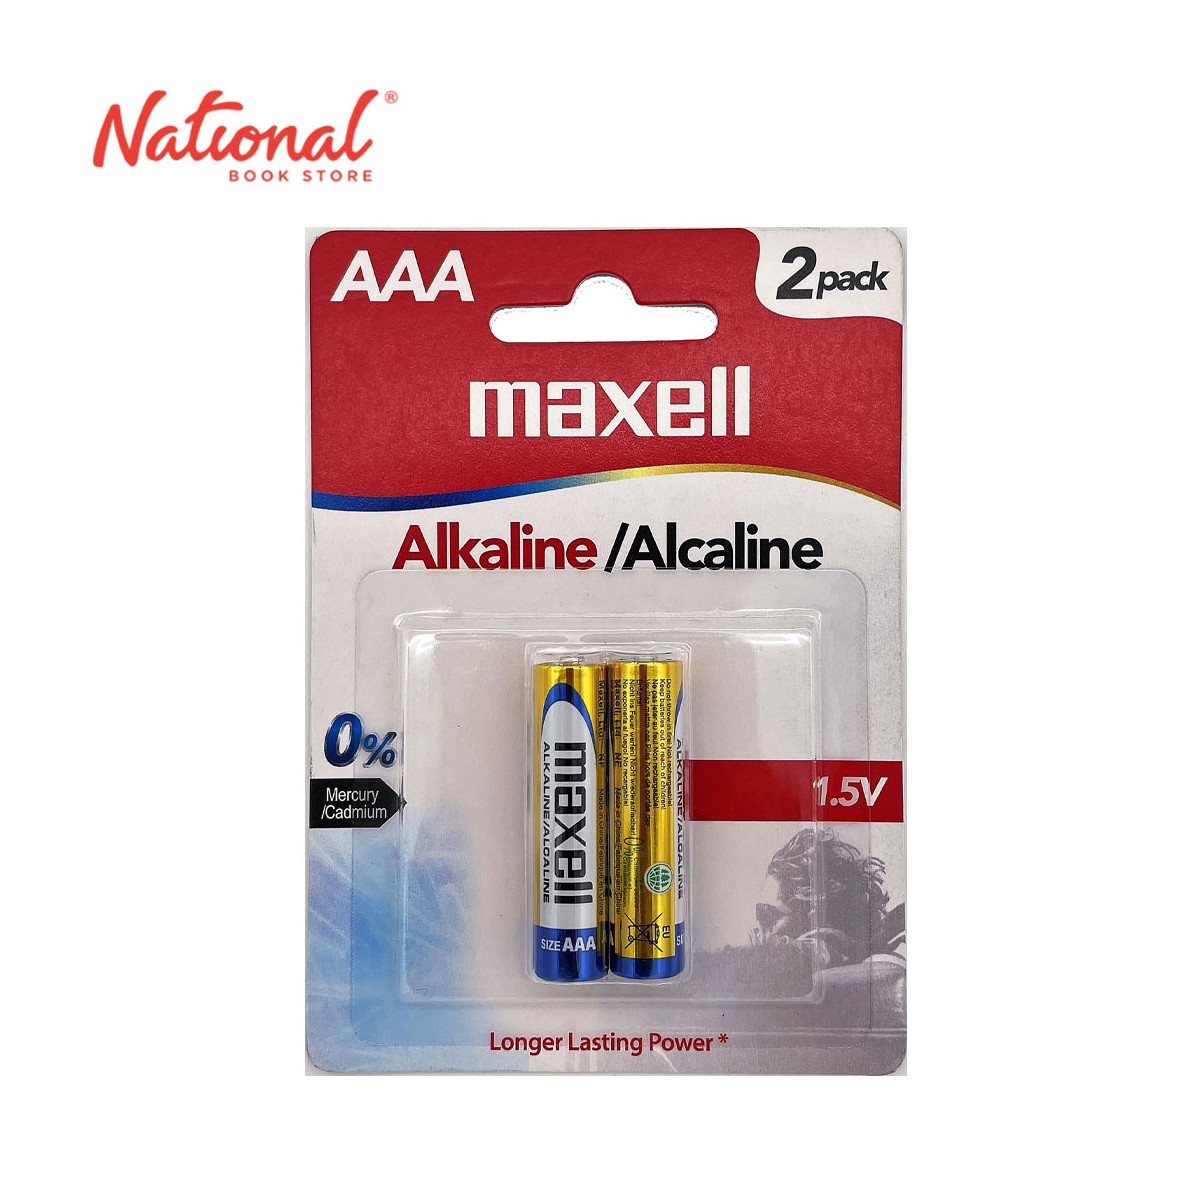 Maxell Battery Alkaline AAA 2 pieces - Home & Office Supplies